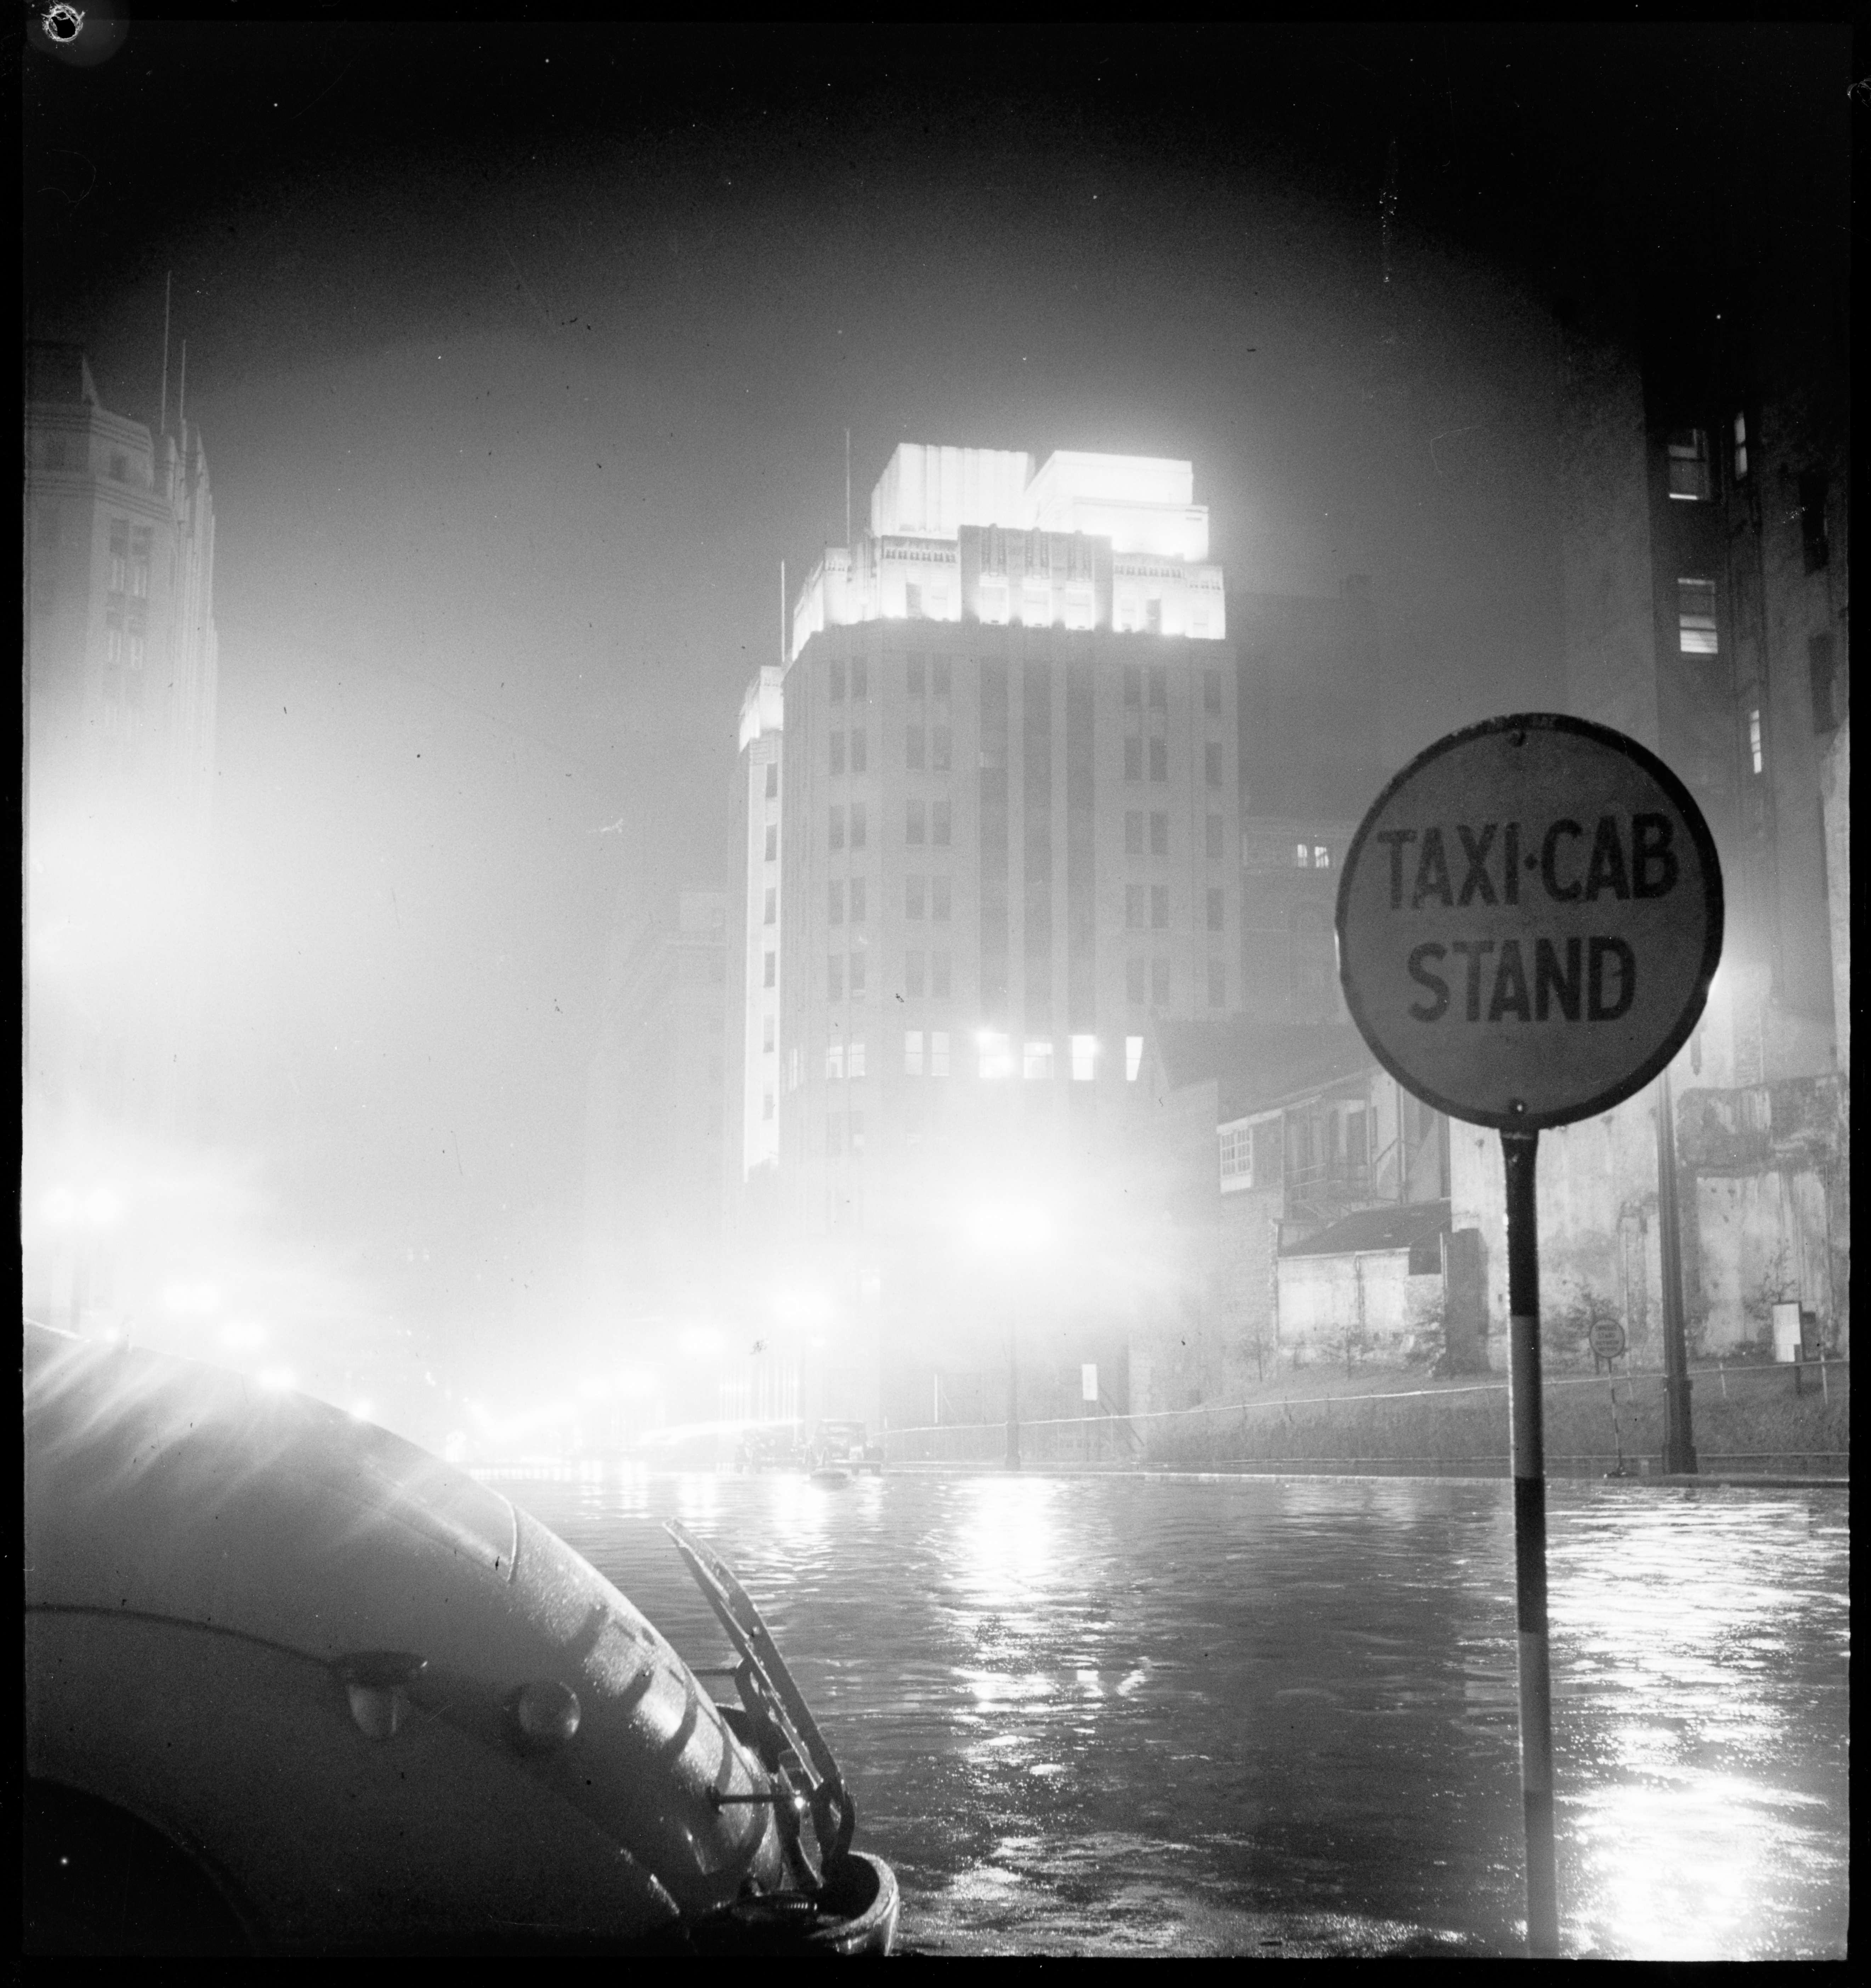 Taxi cab stand at night, Martin Place, Sydney, c. 1938